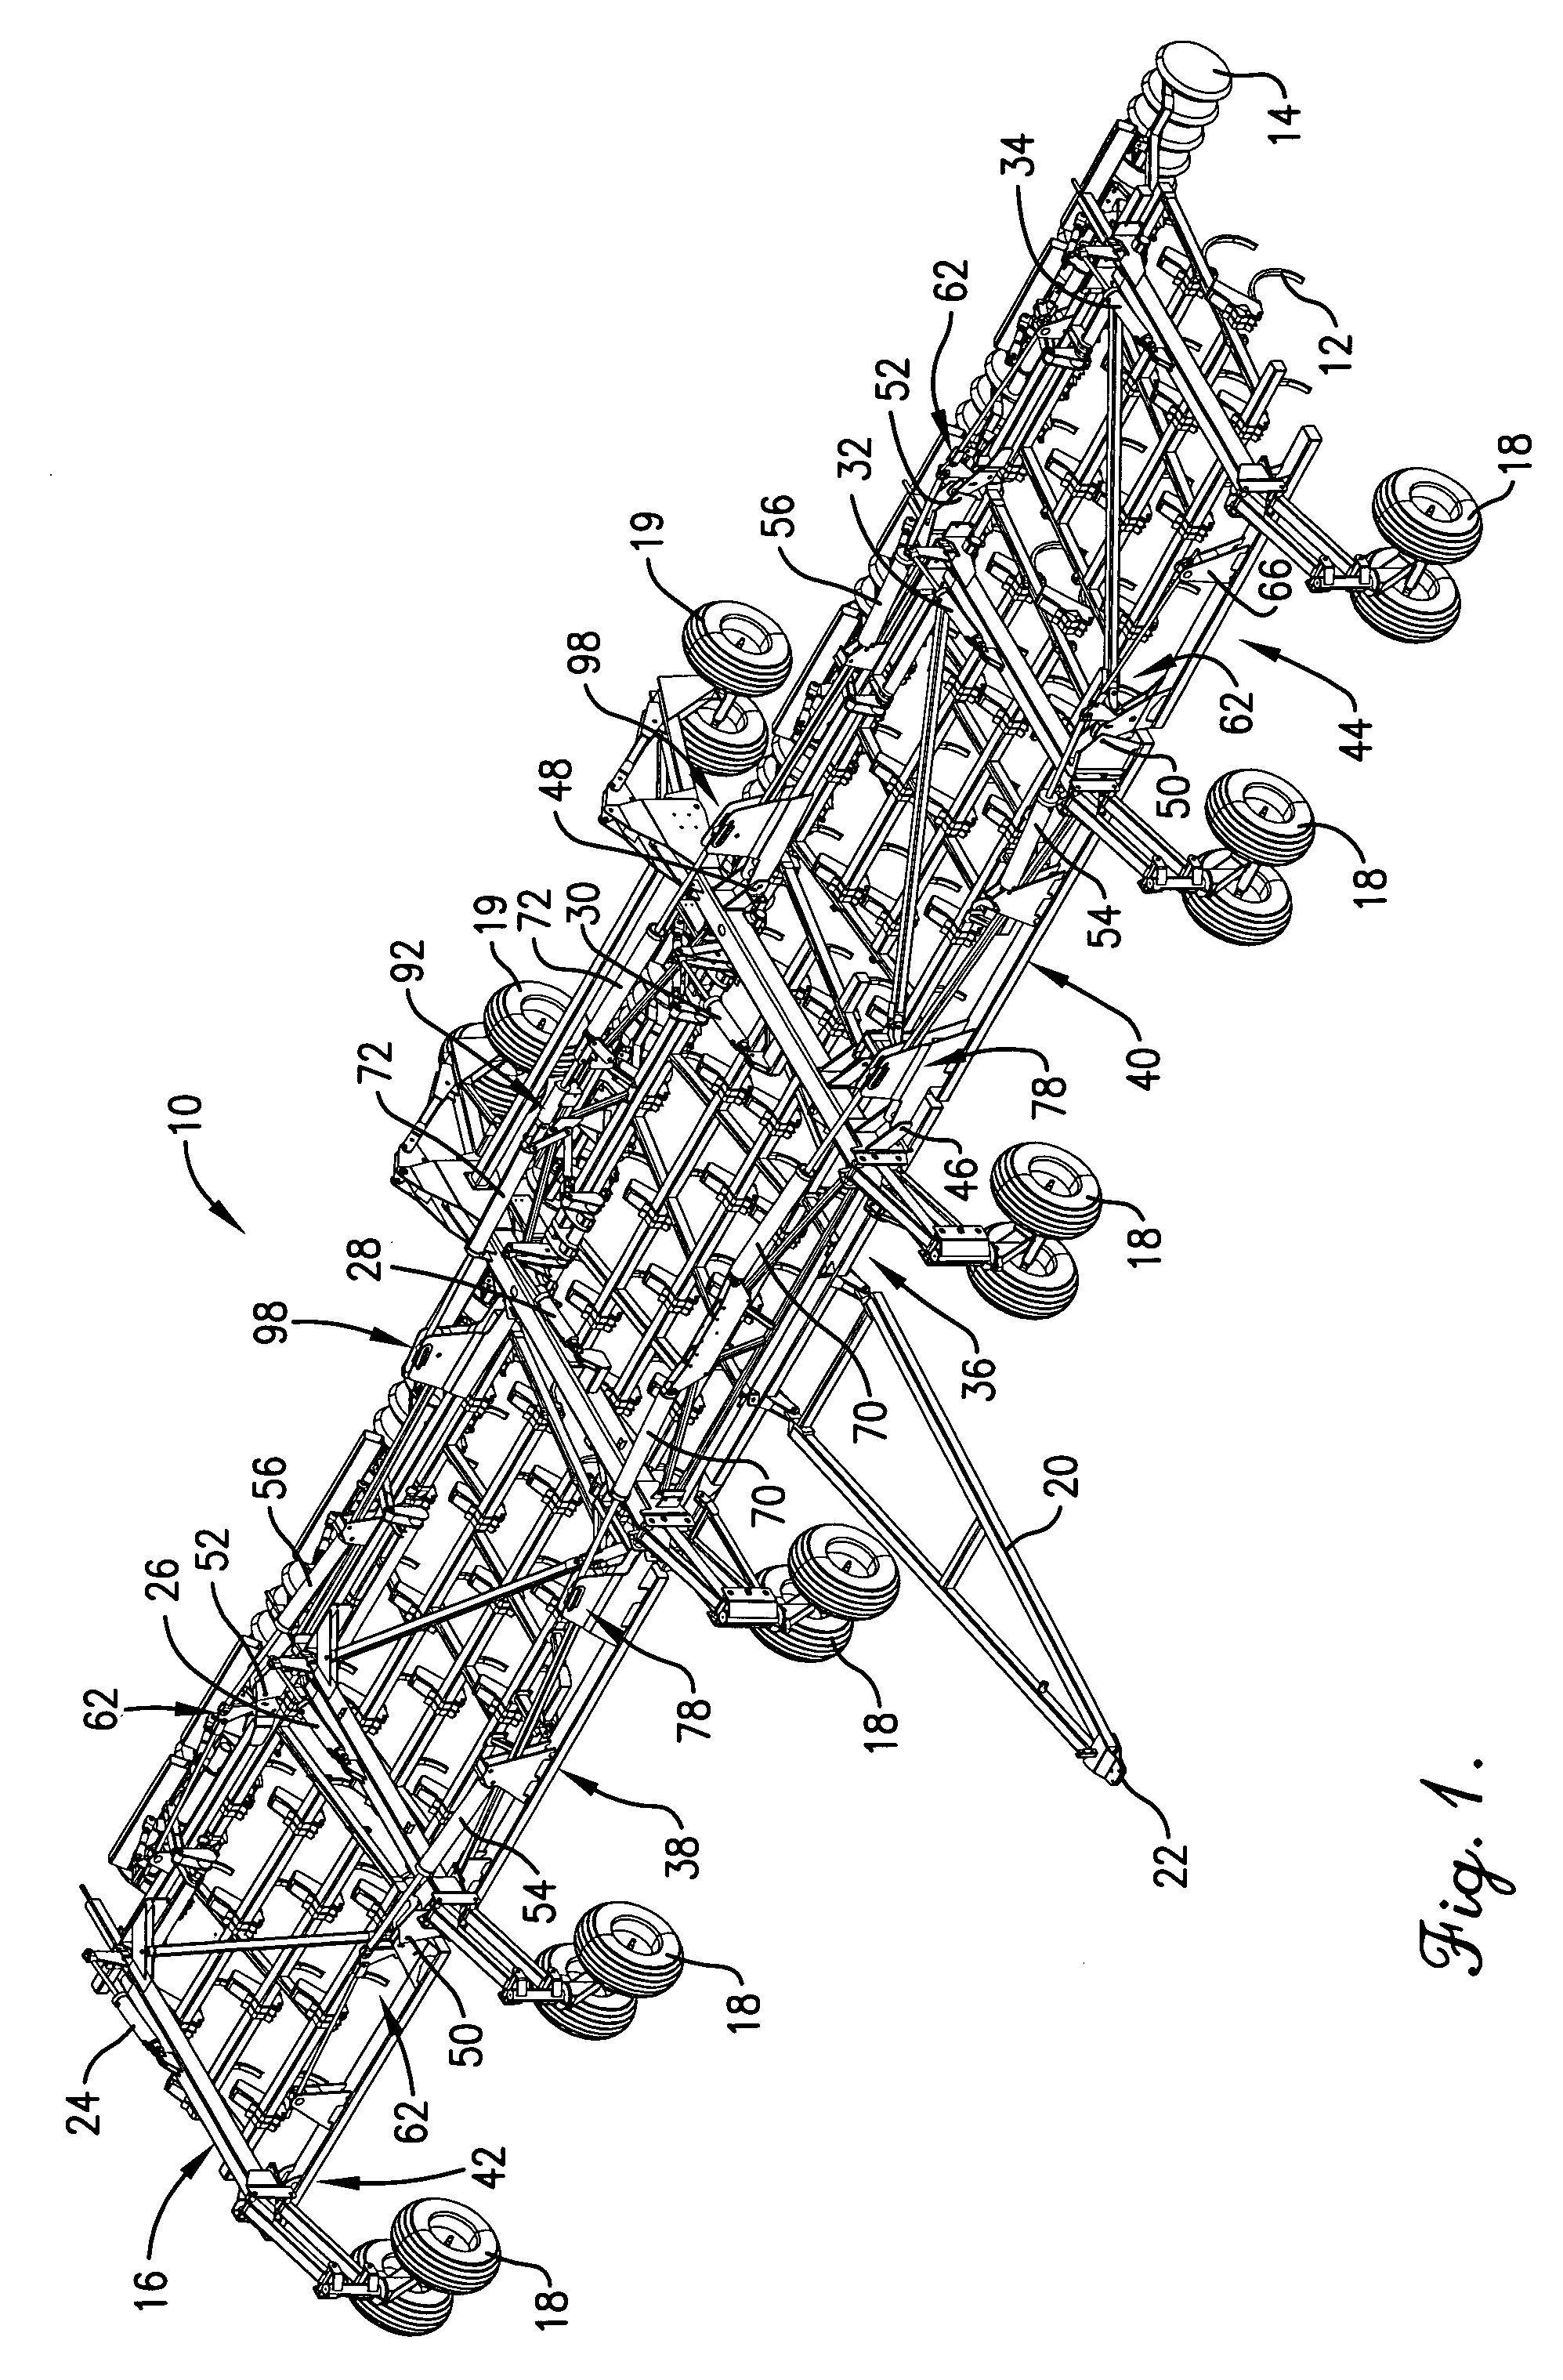 Hydraulic holding cylinder for wing lift mechanism